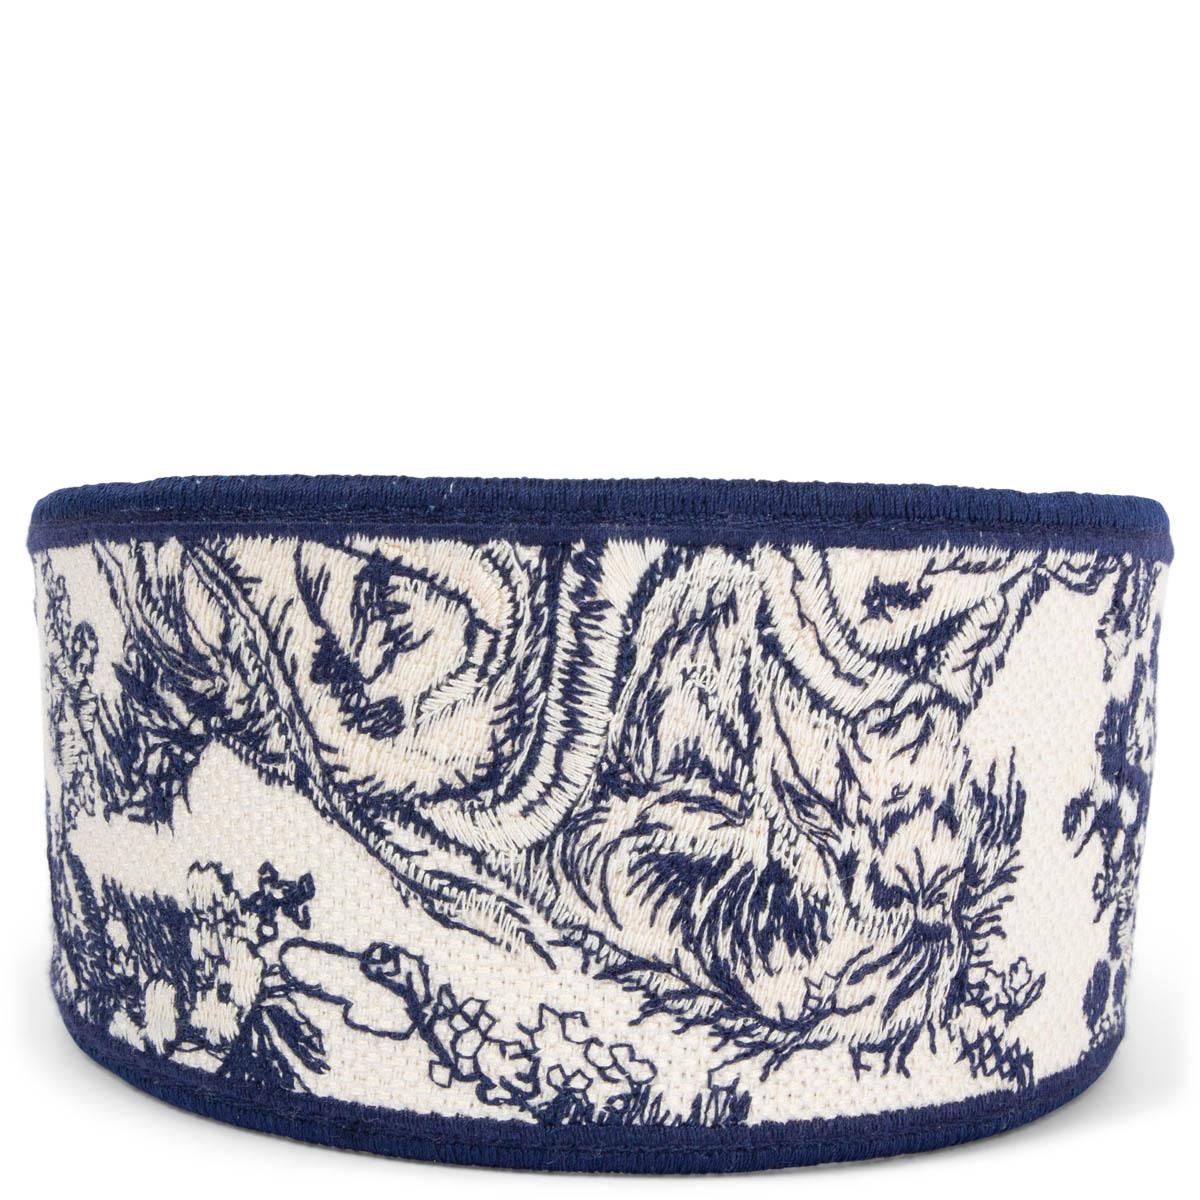 100% authentic Christian Dior Toile De Jouy embroidered headband in navy and white canvas. Has been worn once and is in virtually new condition. Comes with dust bag. 

2020 Fall/Winter
Measurements
Tag Size	OS
Width	8cm (3.1in)

All our listings